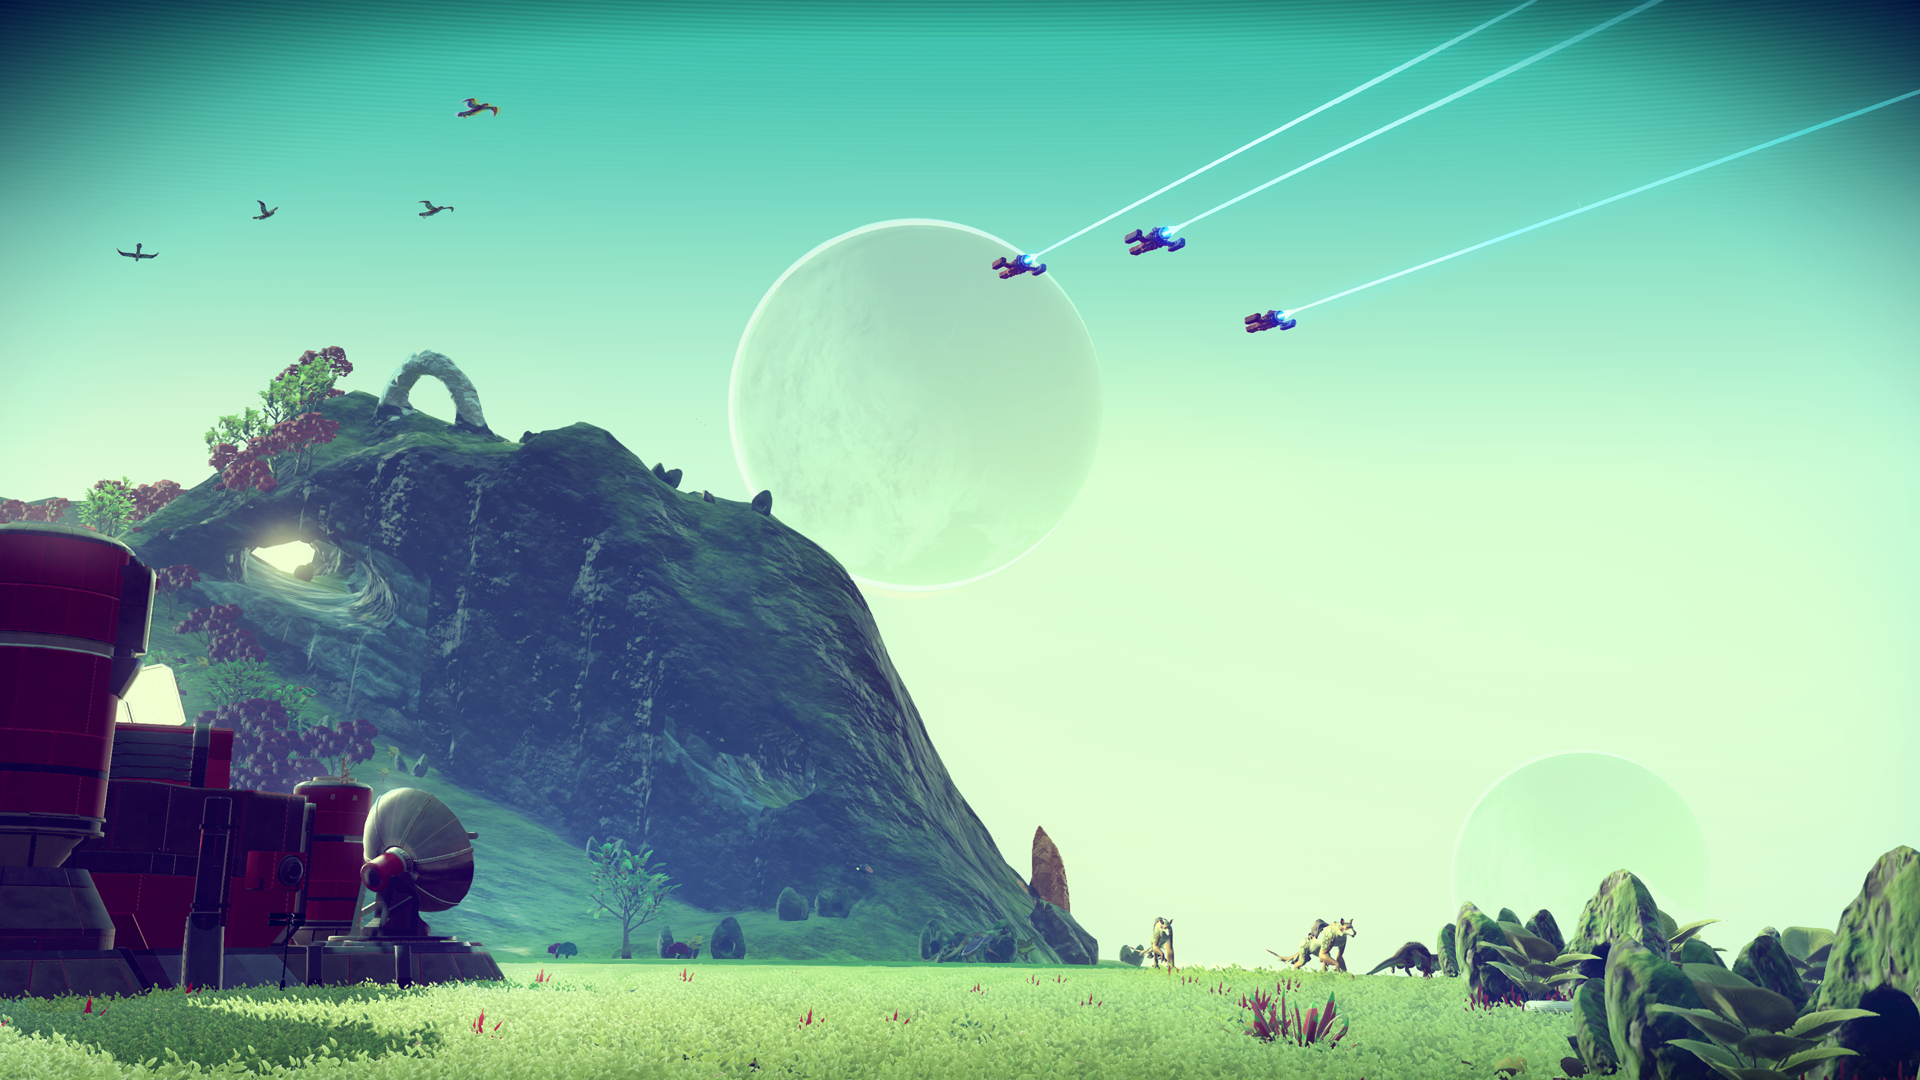 Another screenshot of the minimalist world featured in No Man's Sky.